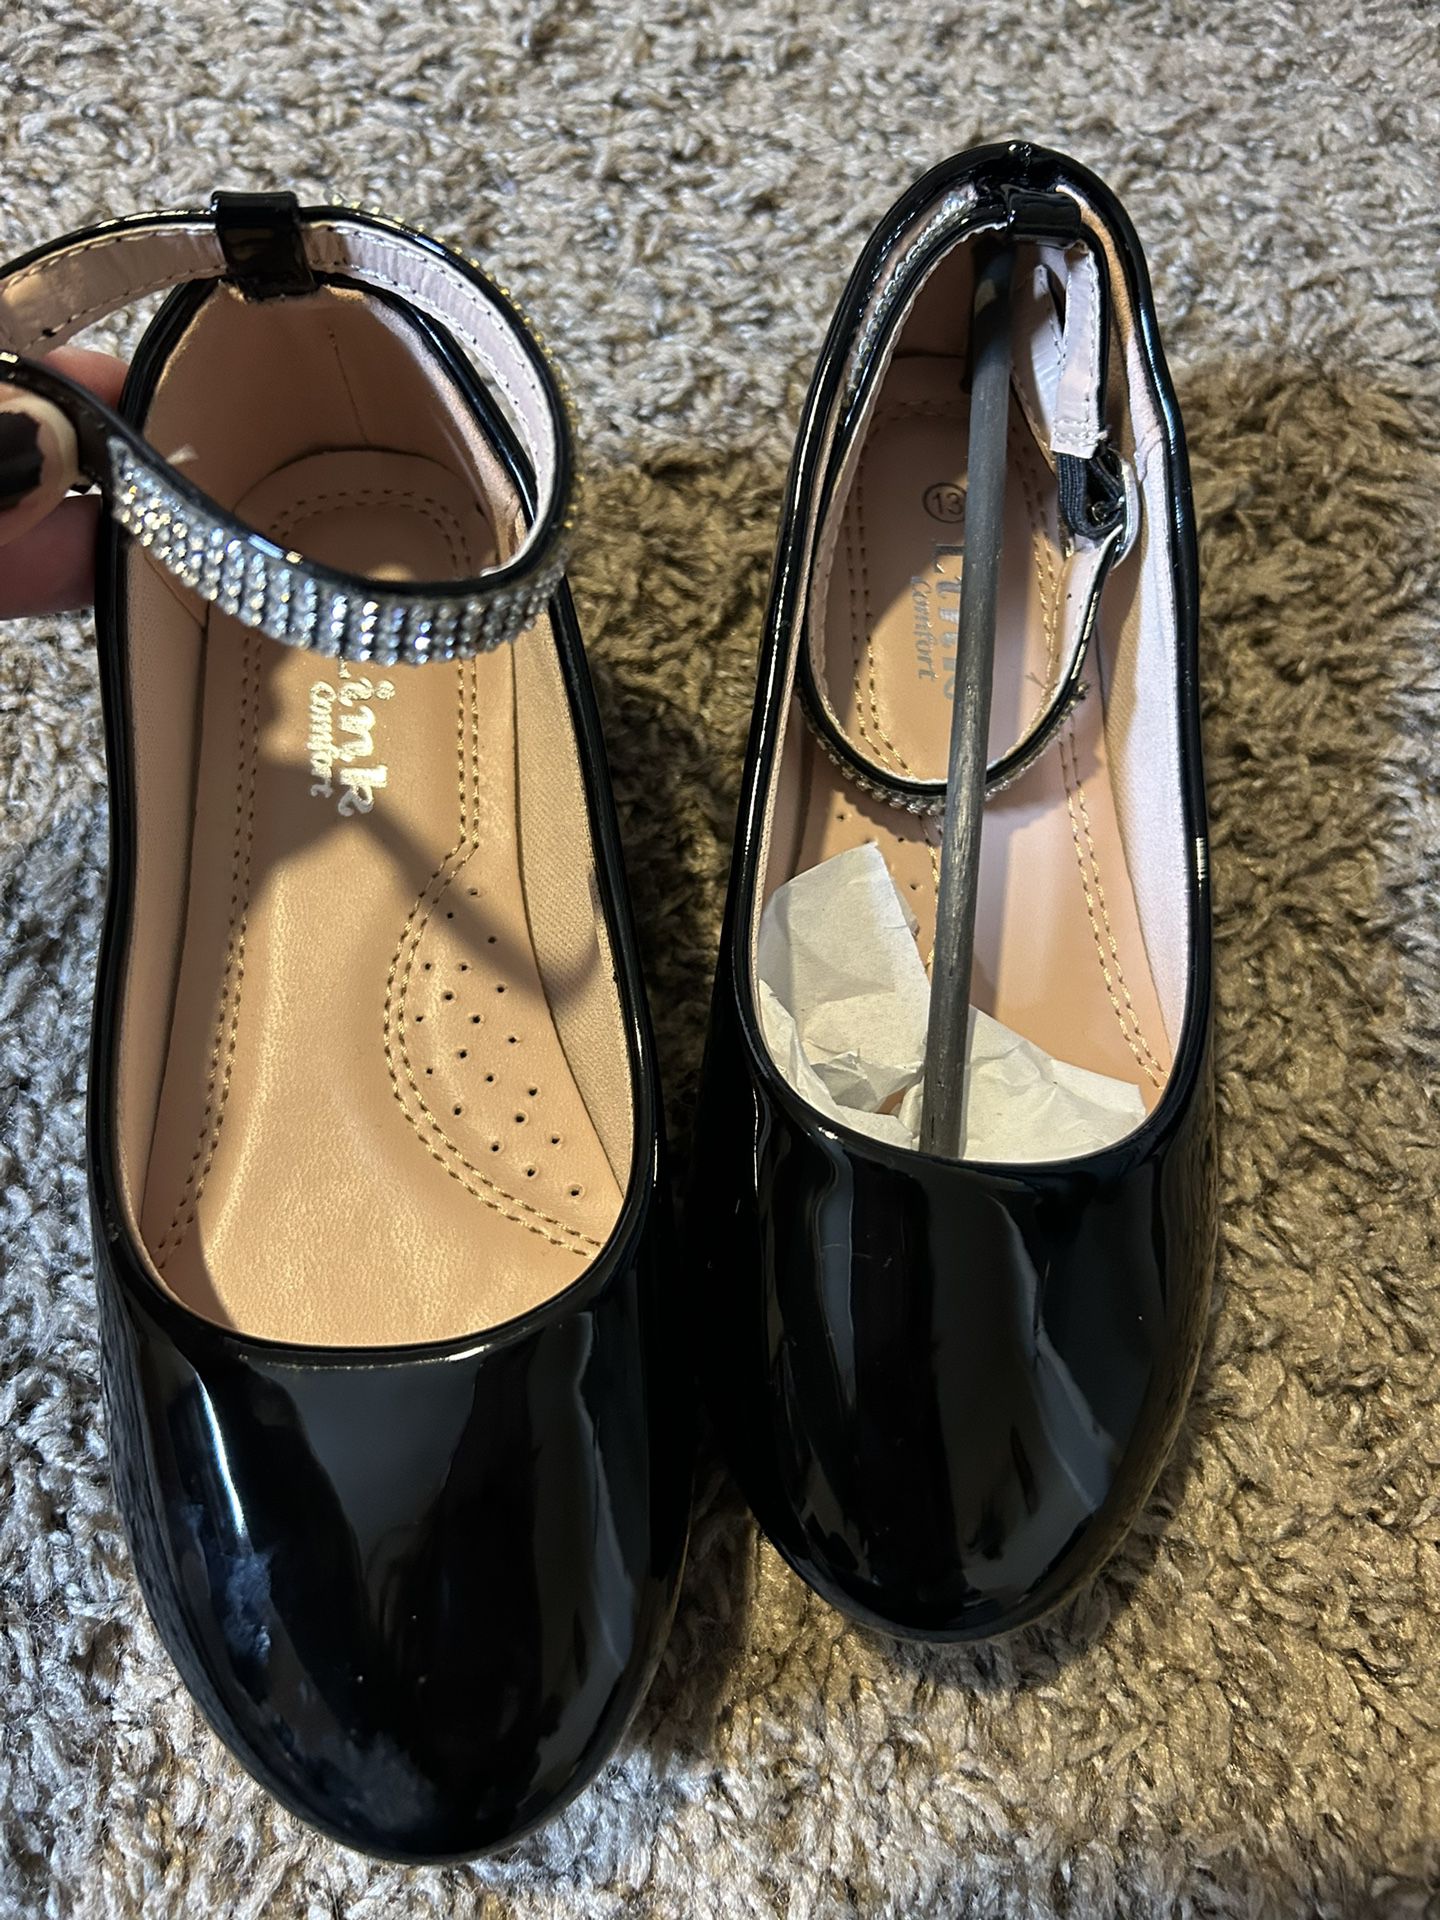 Black And White Dress Shoes For Girl Size 13  